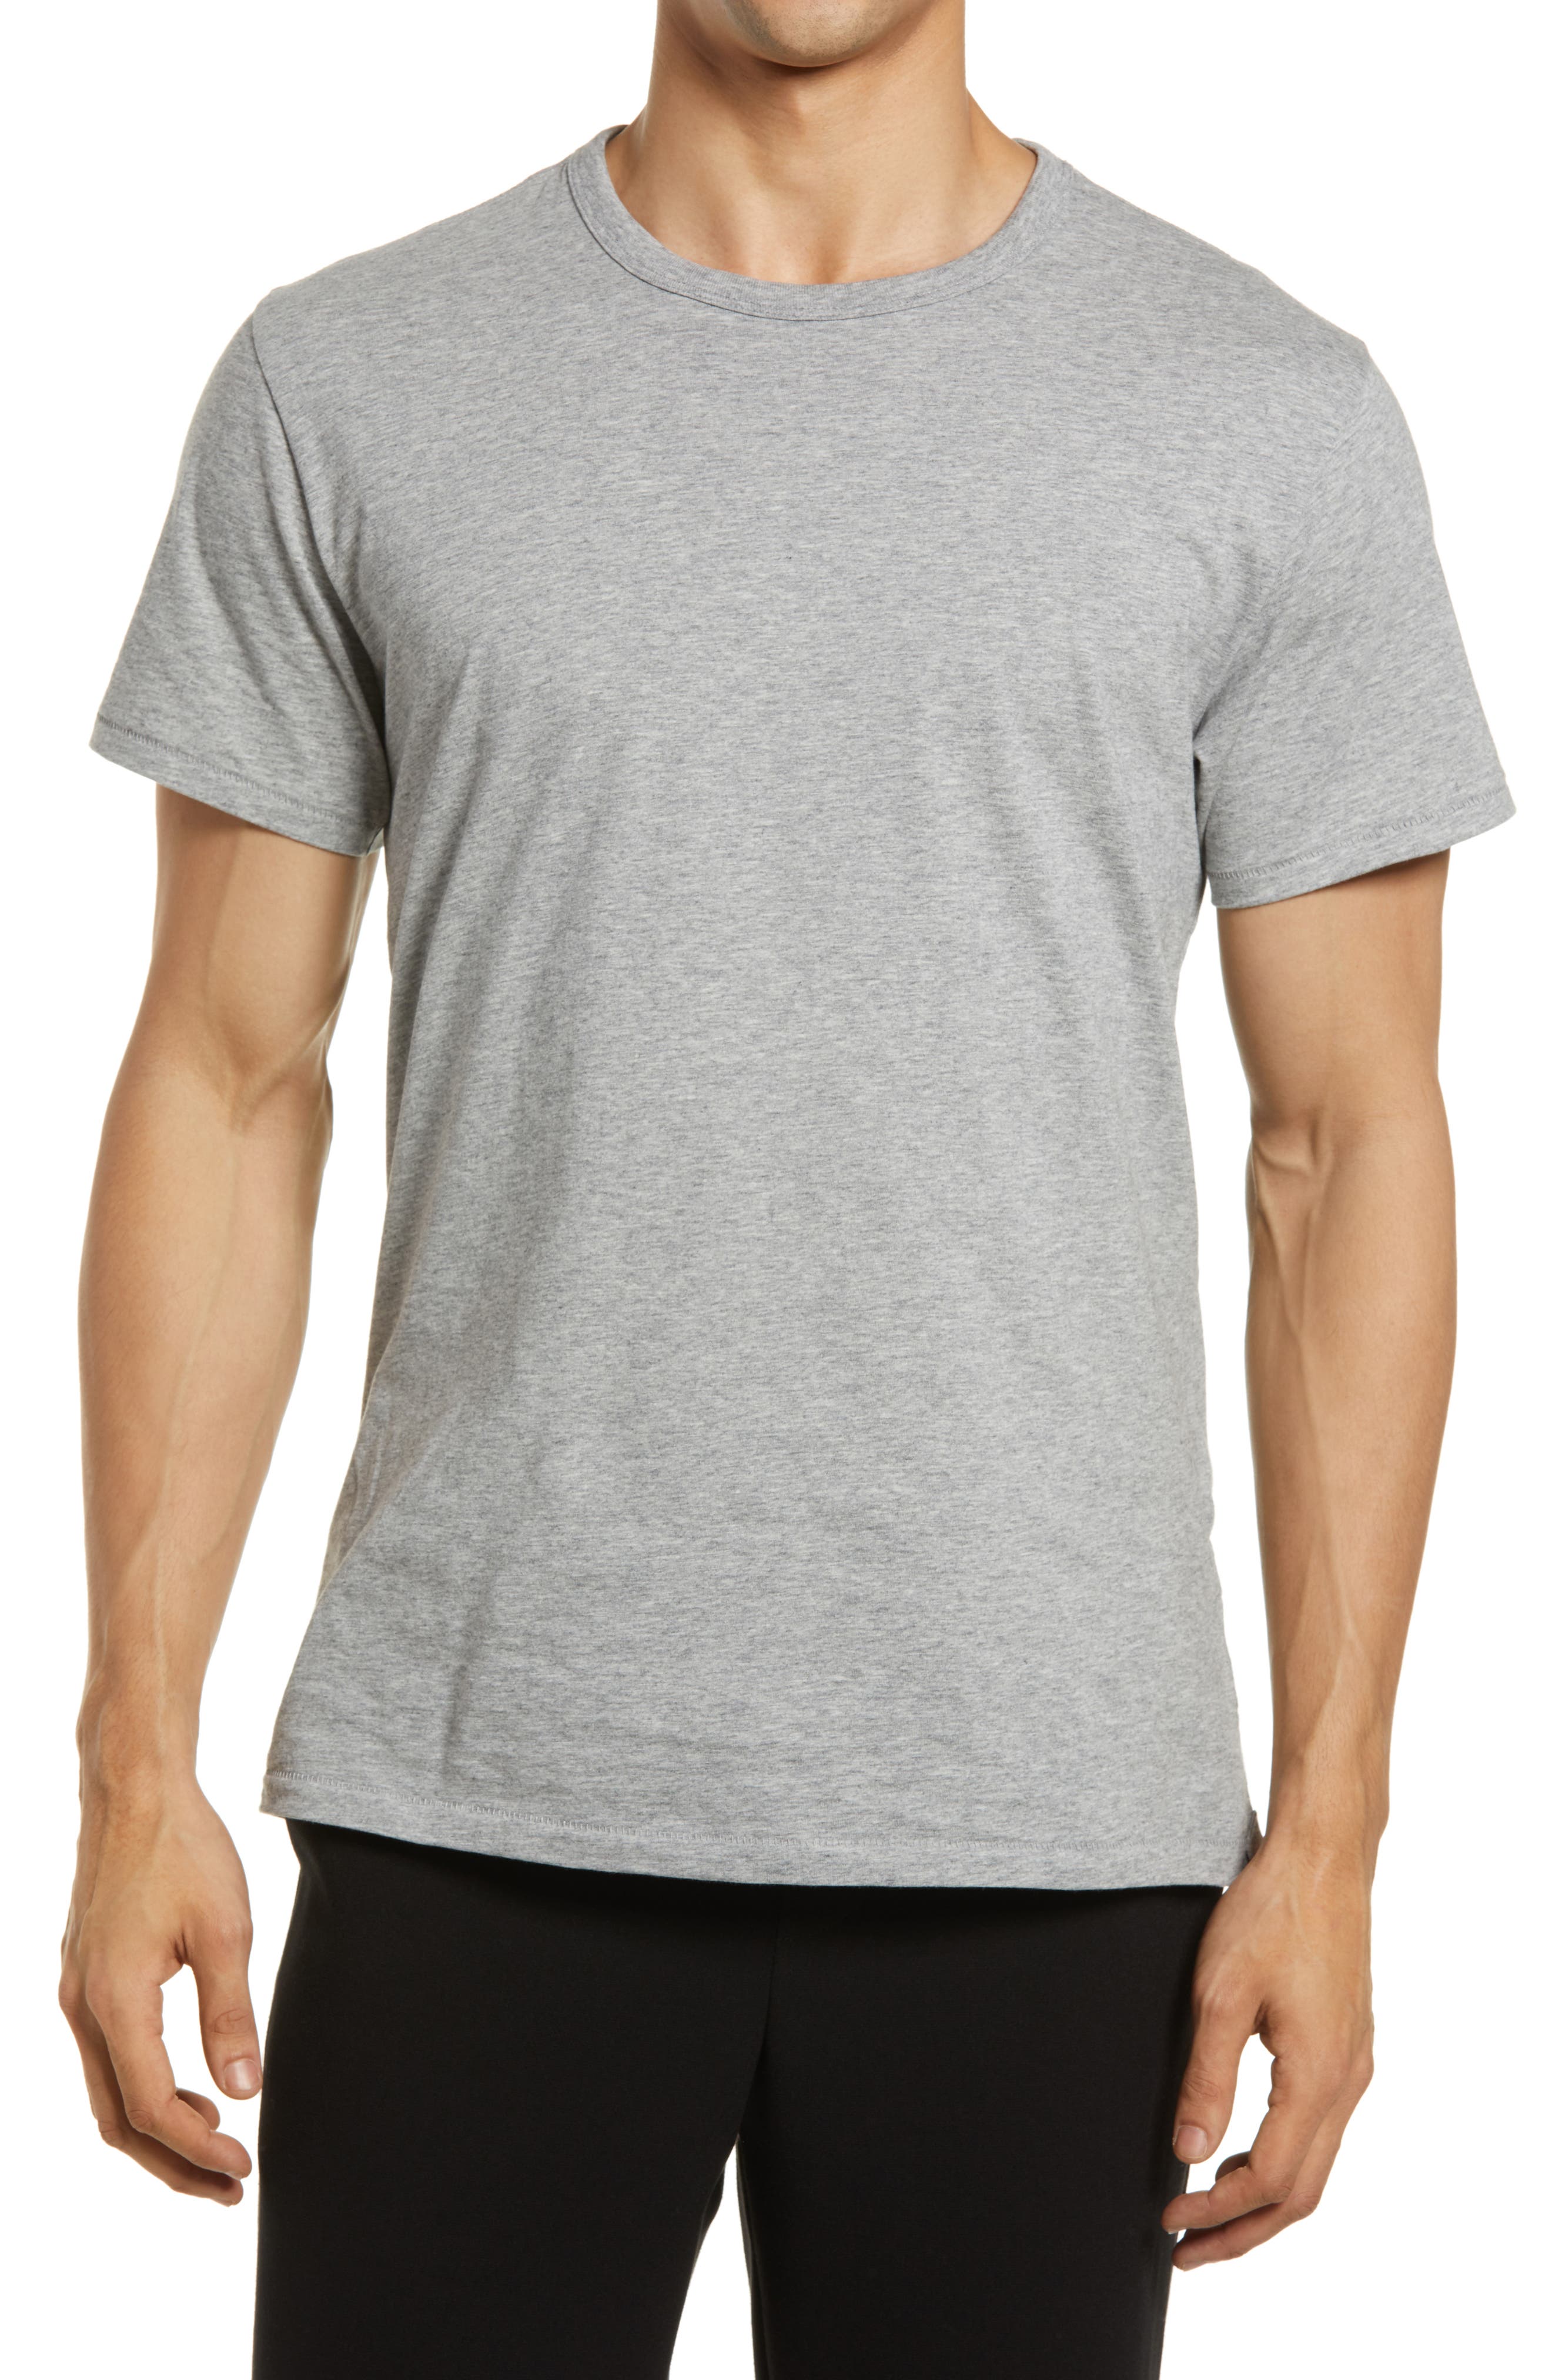 rag & bone Principle Base T-Shirt in Heather Grey at Nordstrom, Size Small